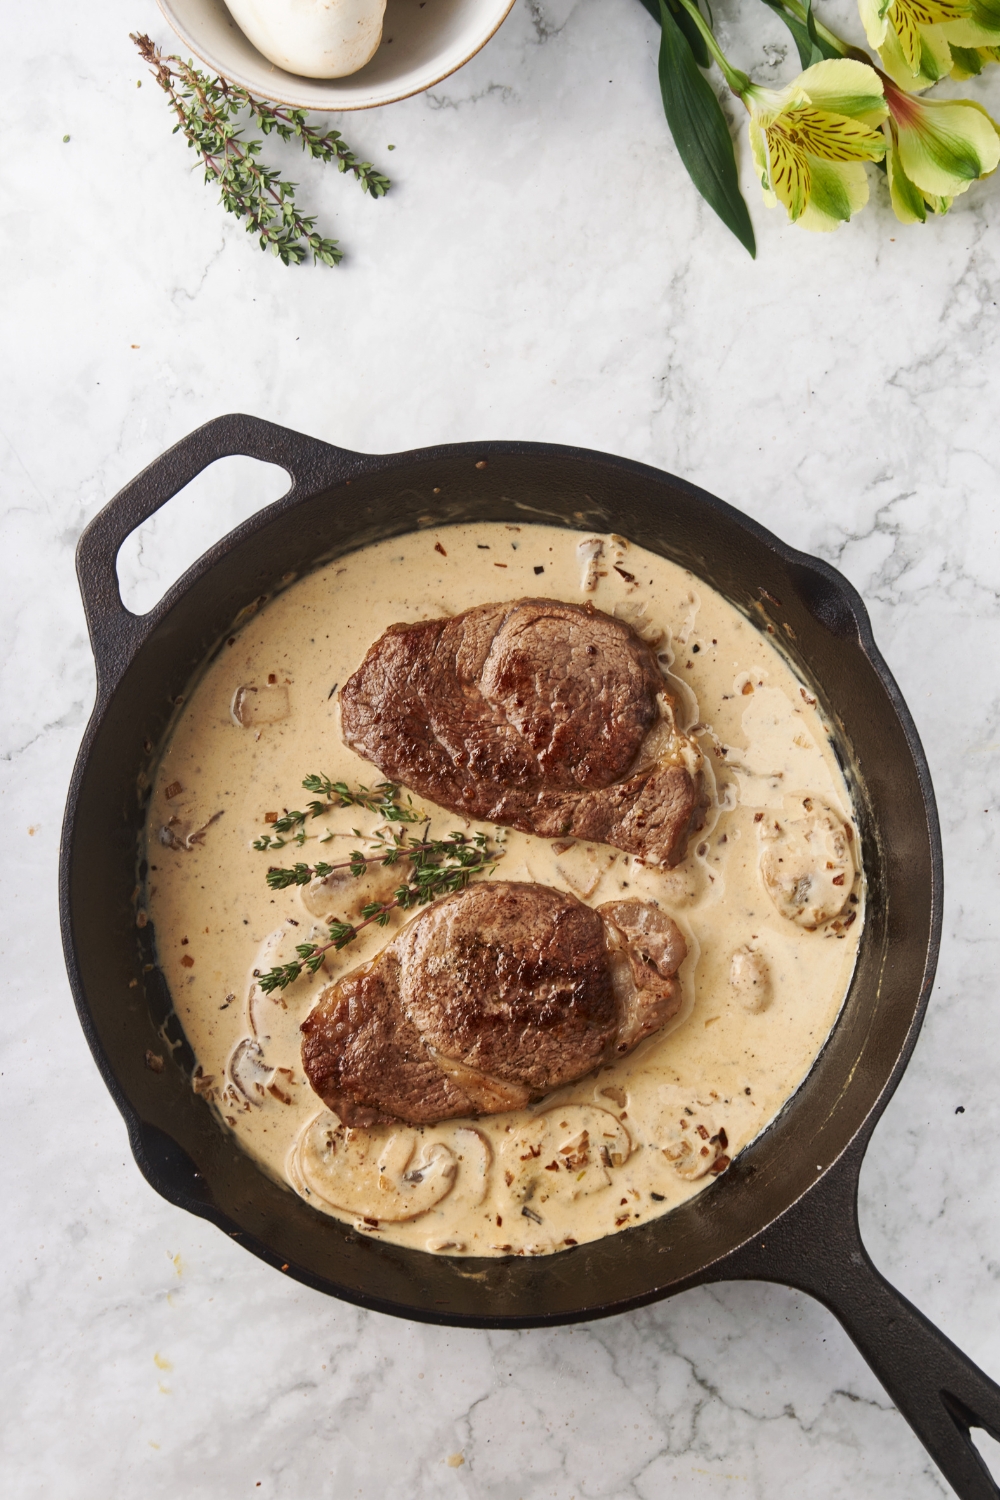 A cast iron skillet with two seared filet mignon steaks and a brown mushroom sauce.